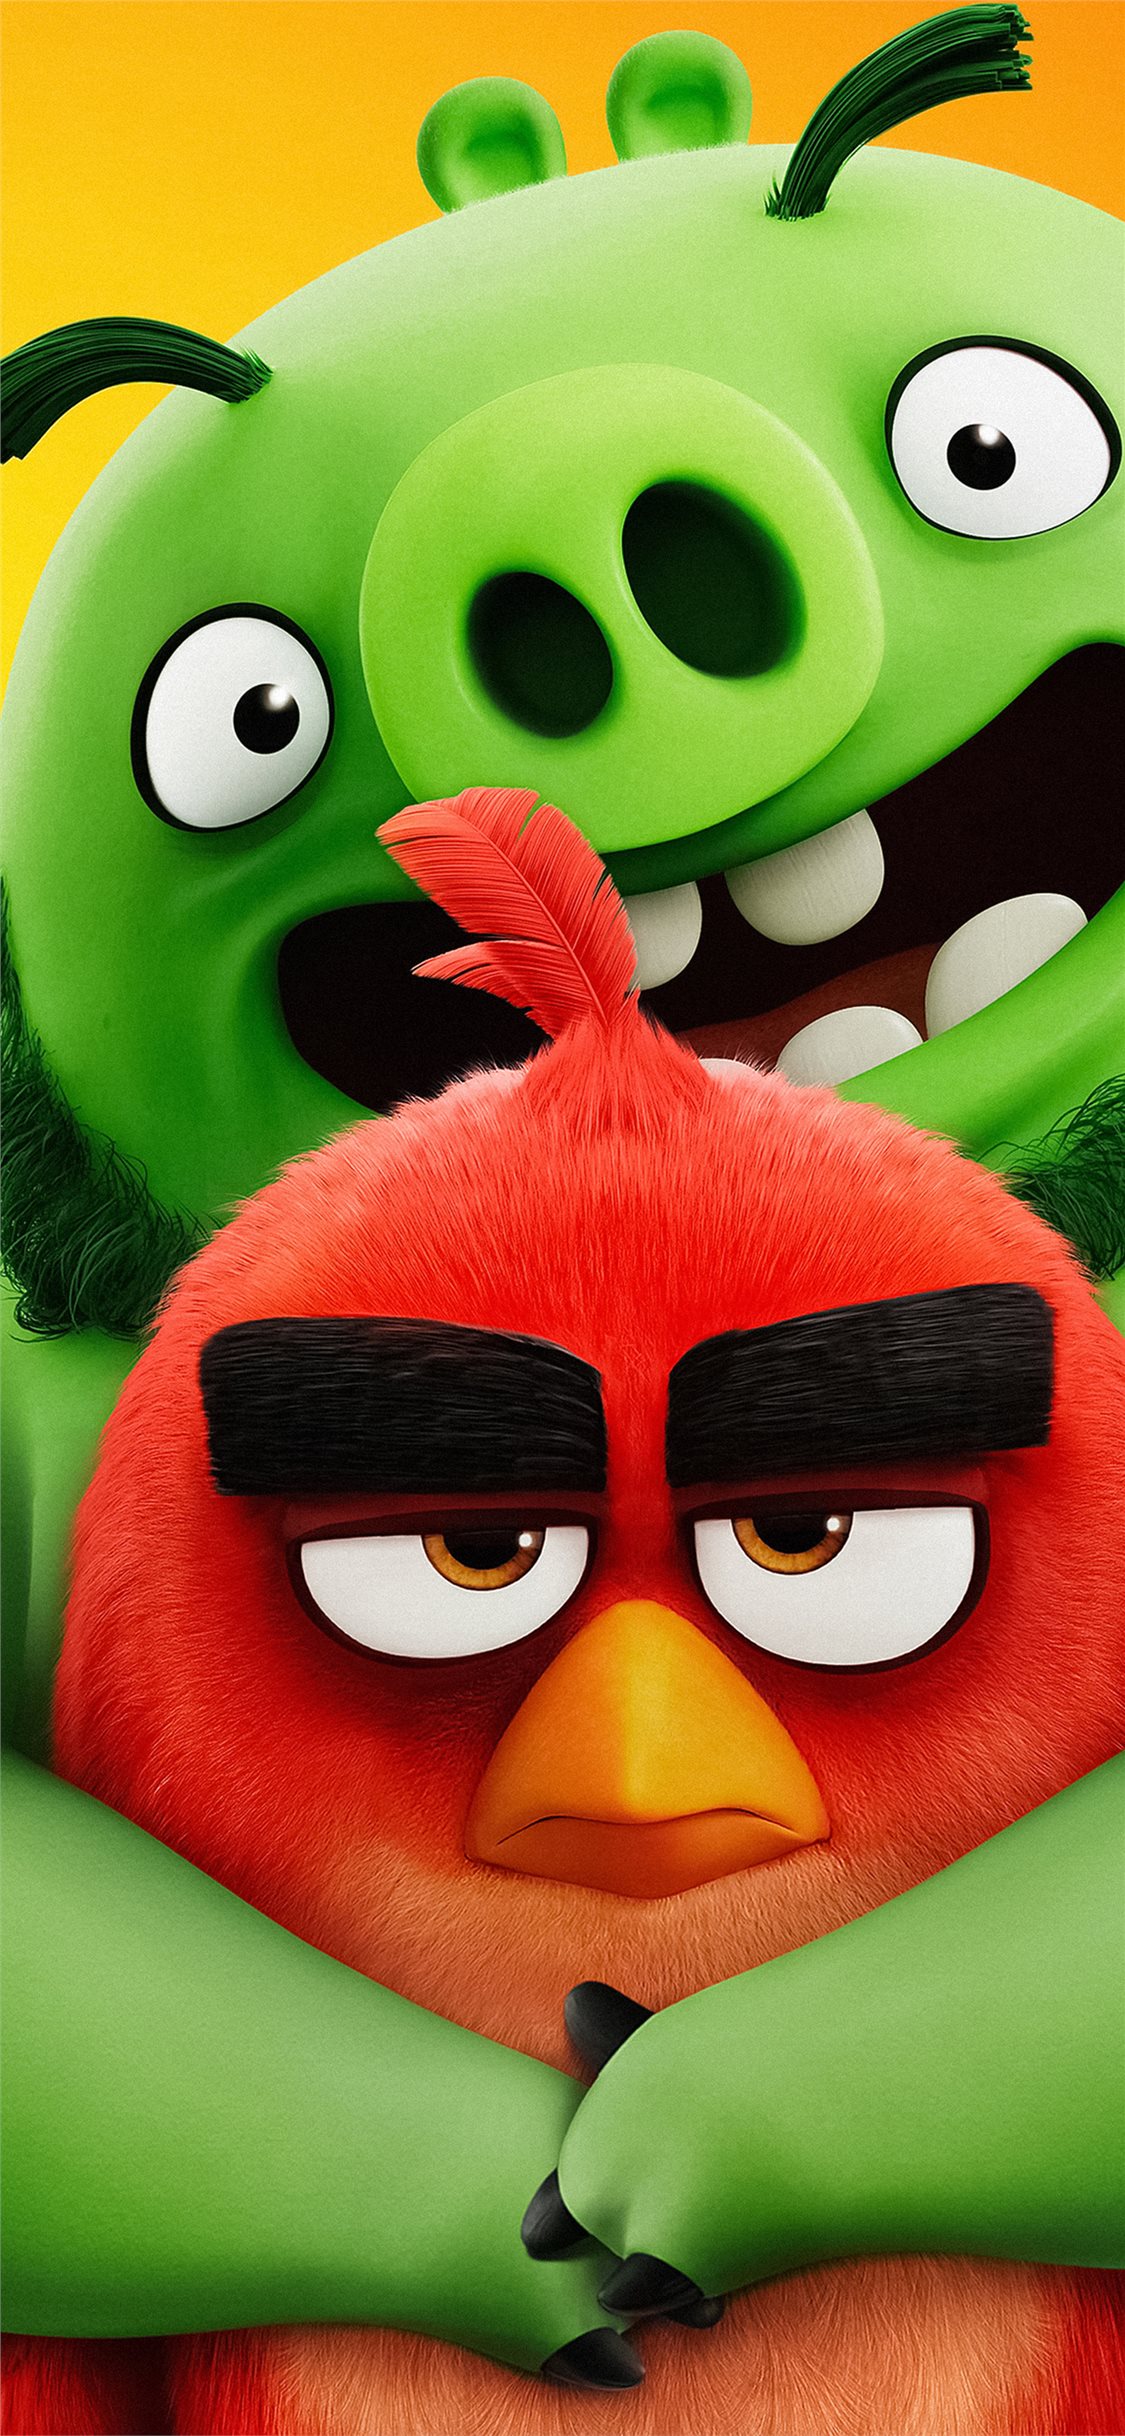 The Angry Birds Movie 2 2019 5k New Iphone X Wallpapers Free Download